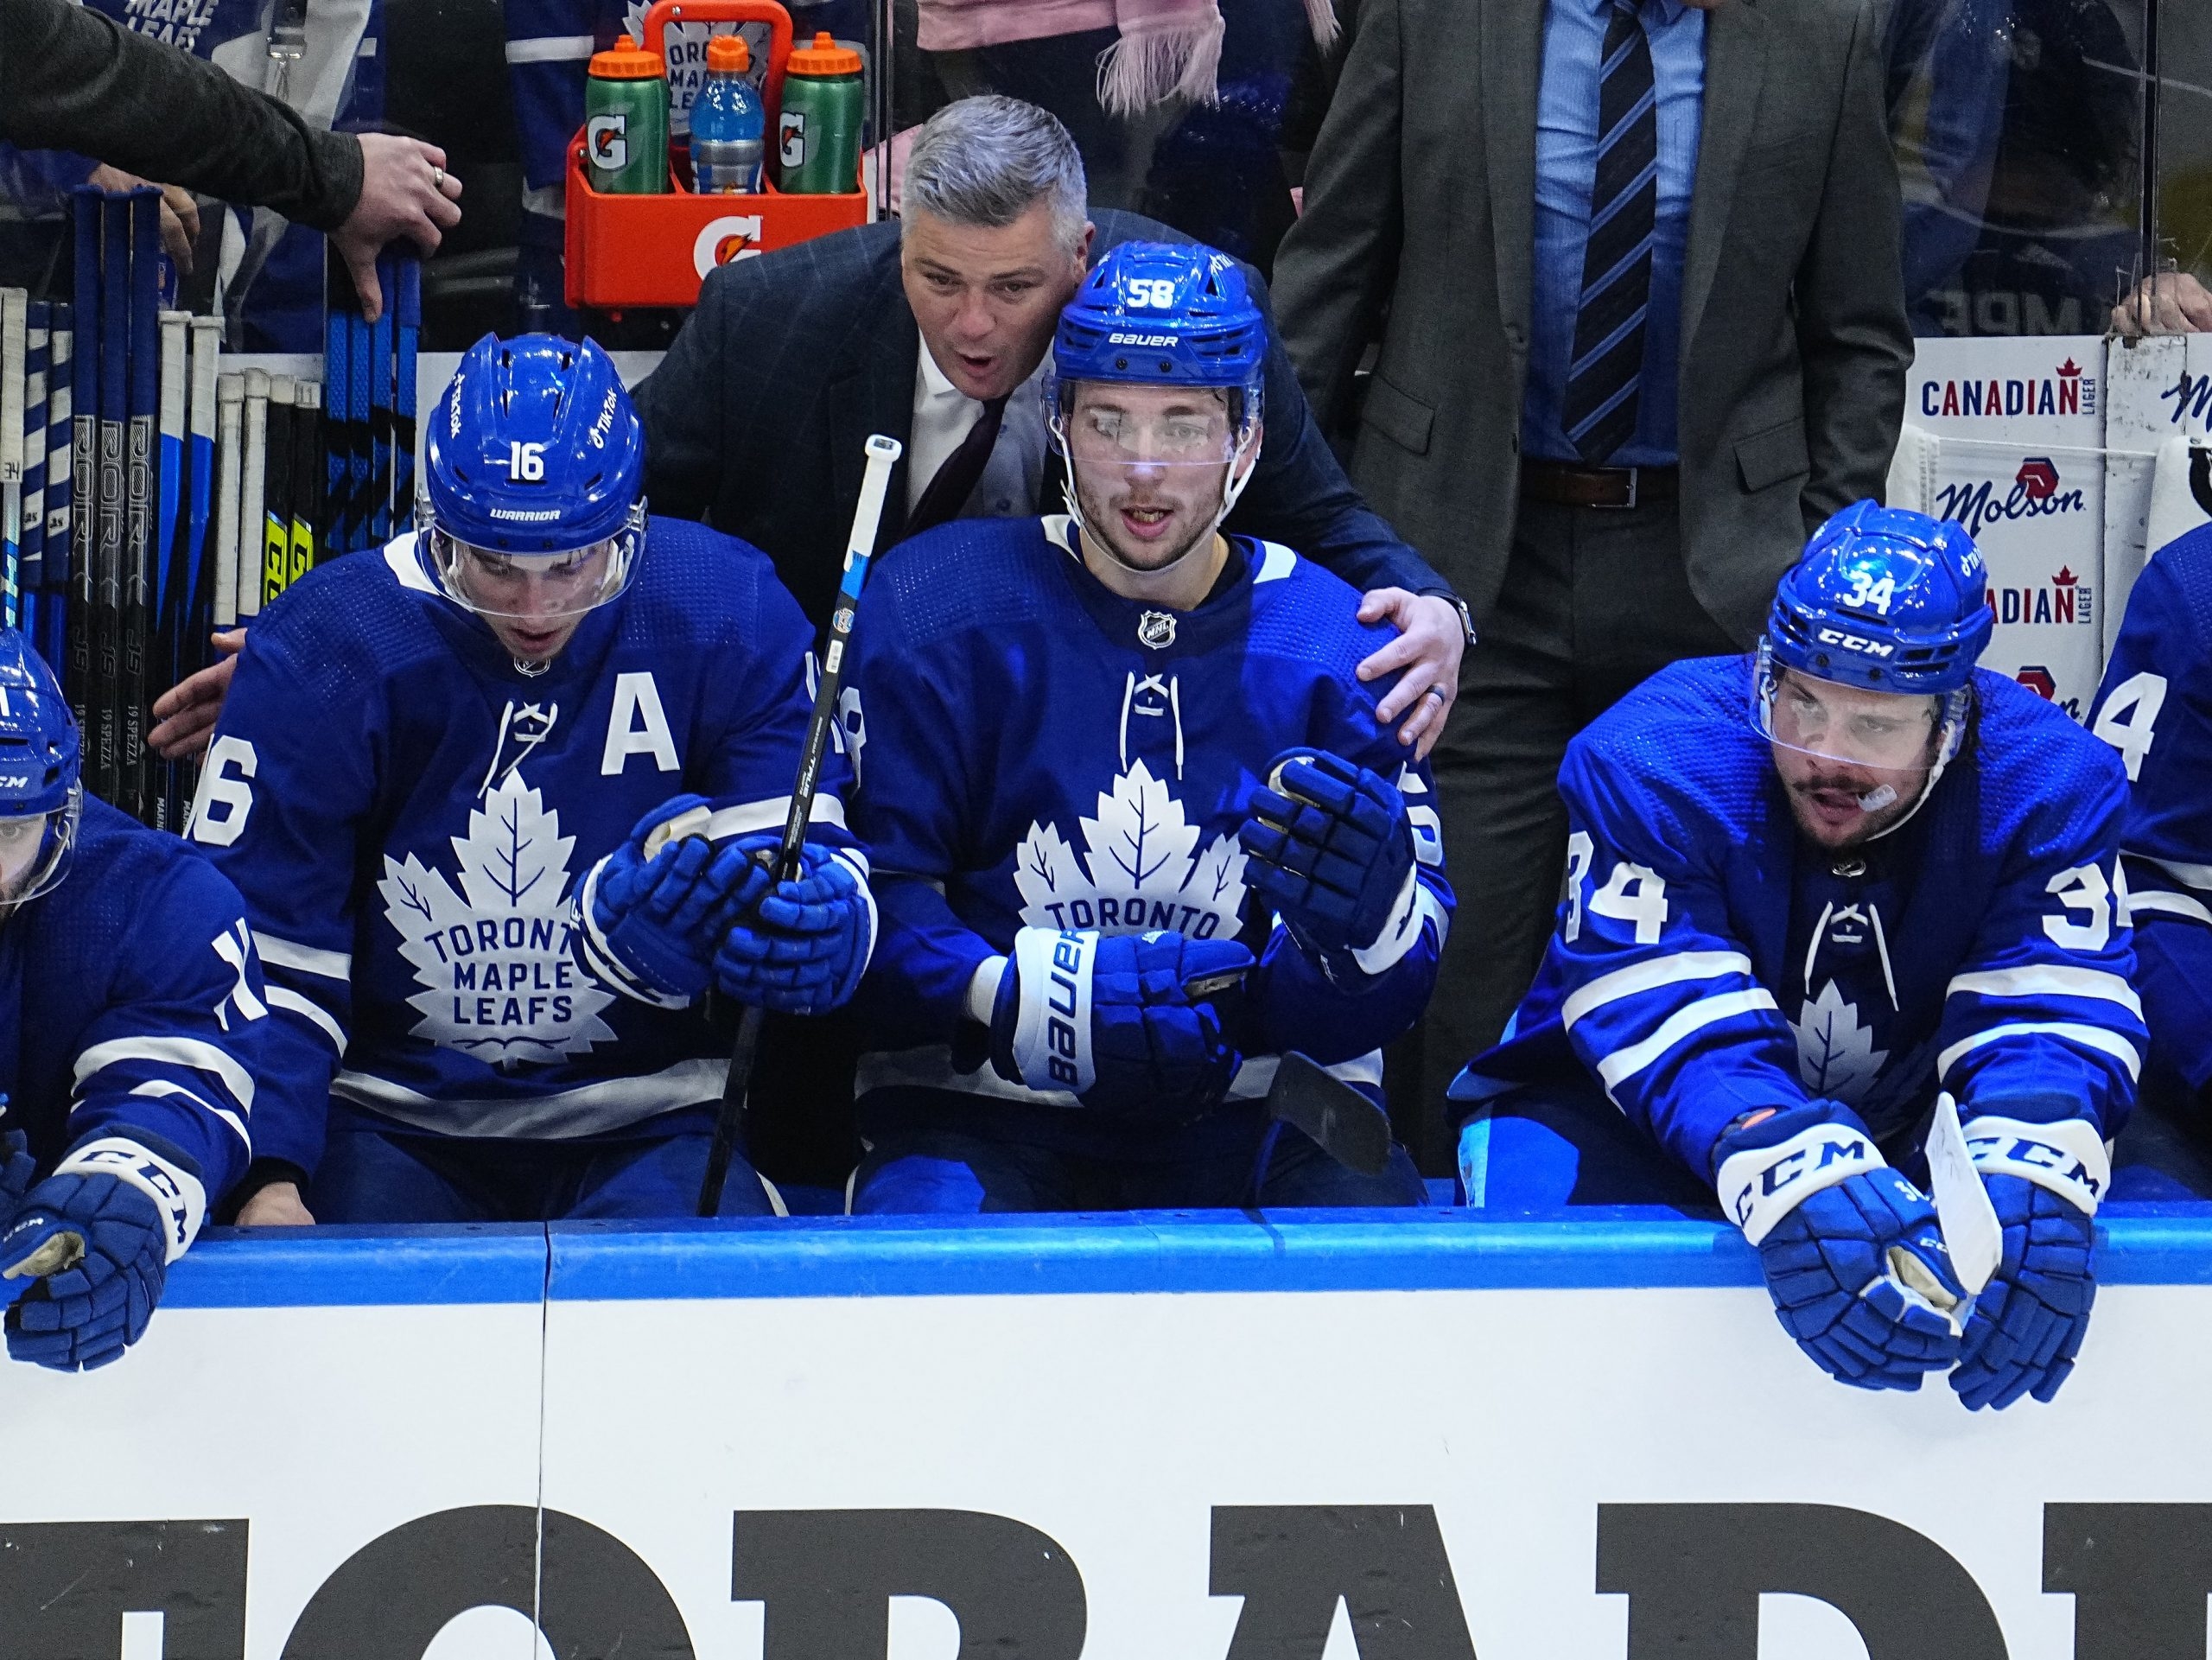 With Marner signed, Maple Leafs' Cup window open until further notice